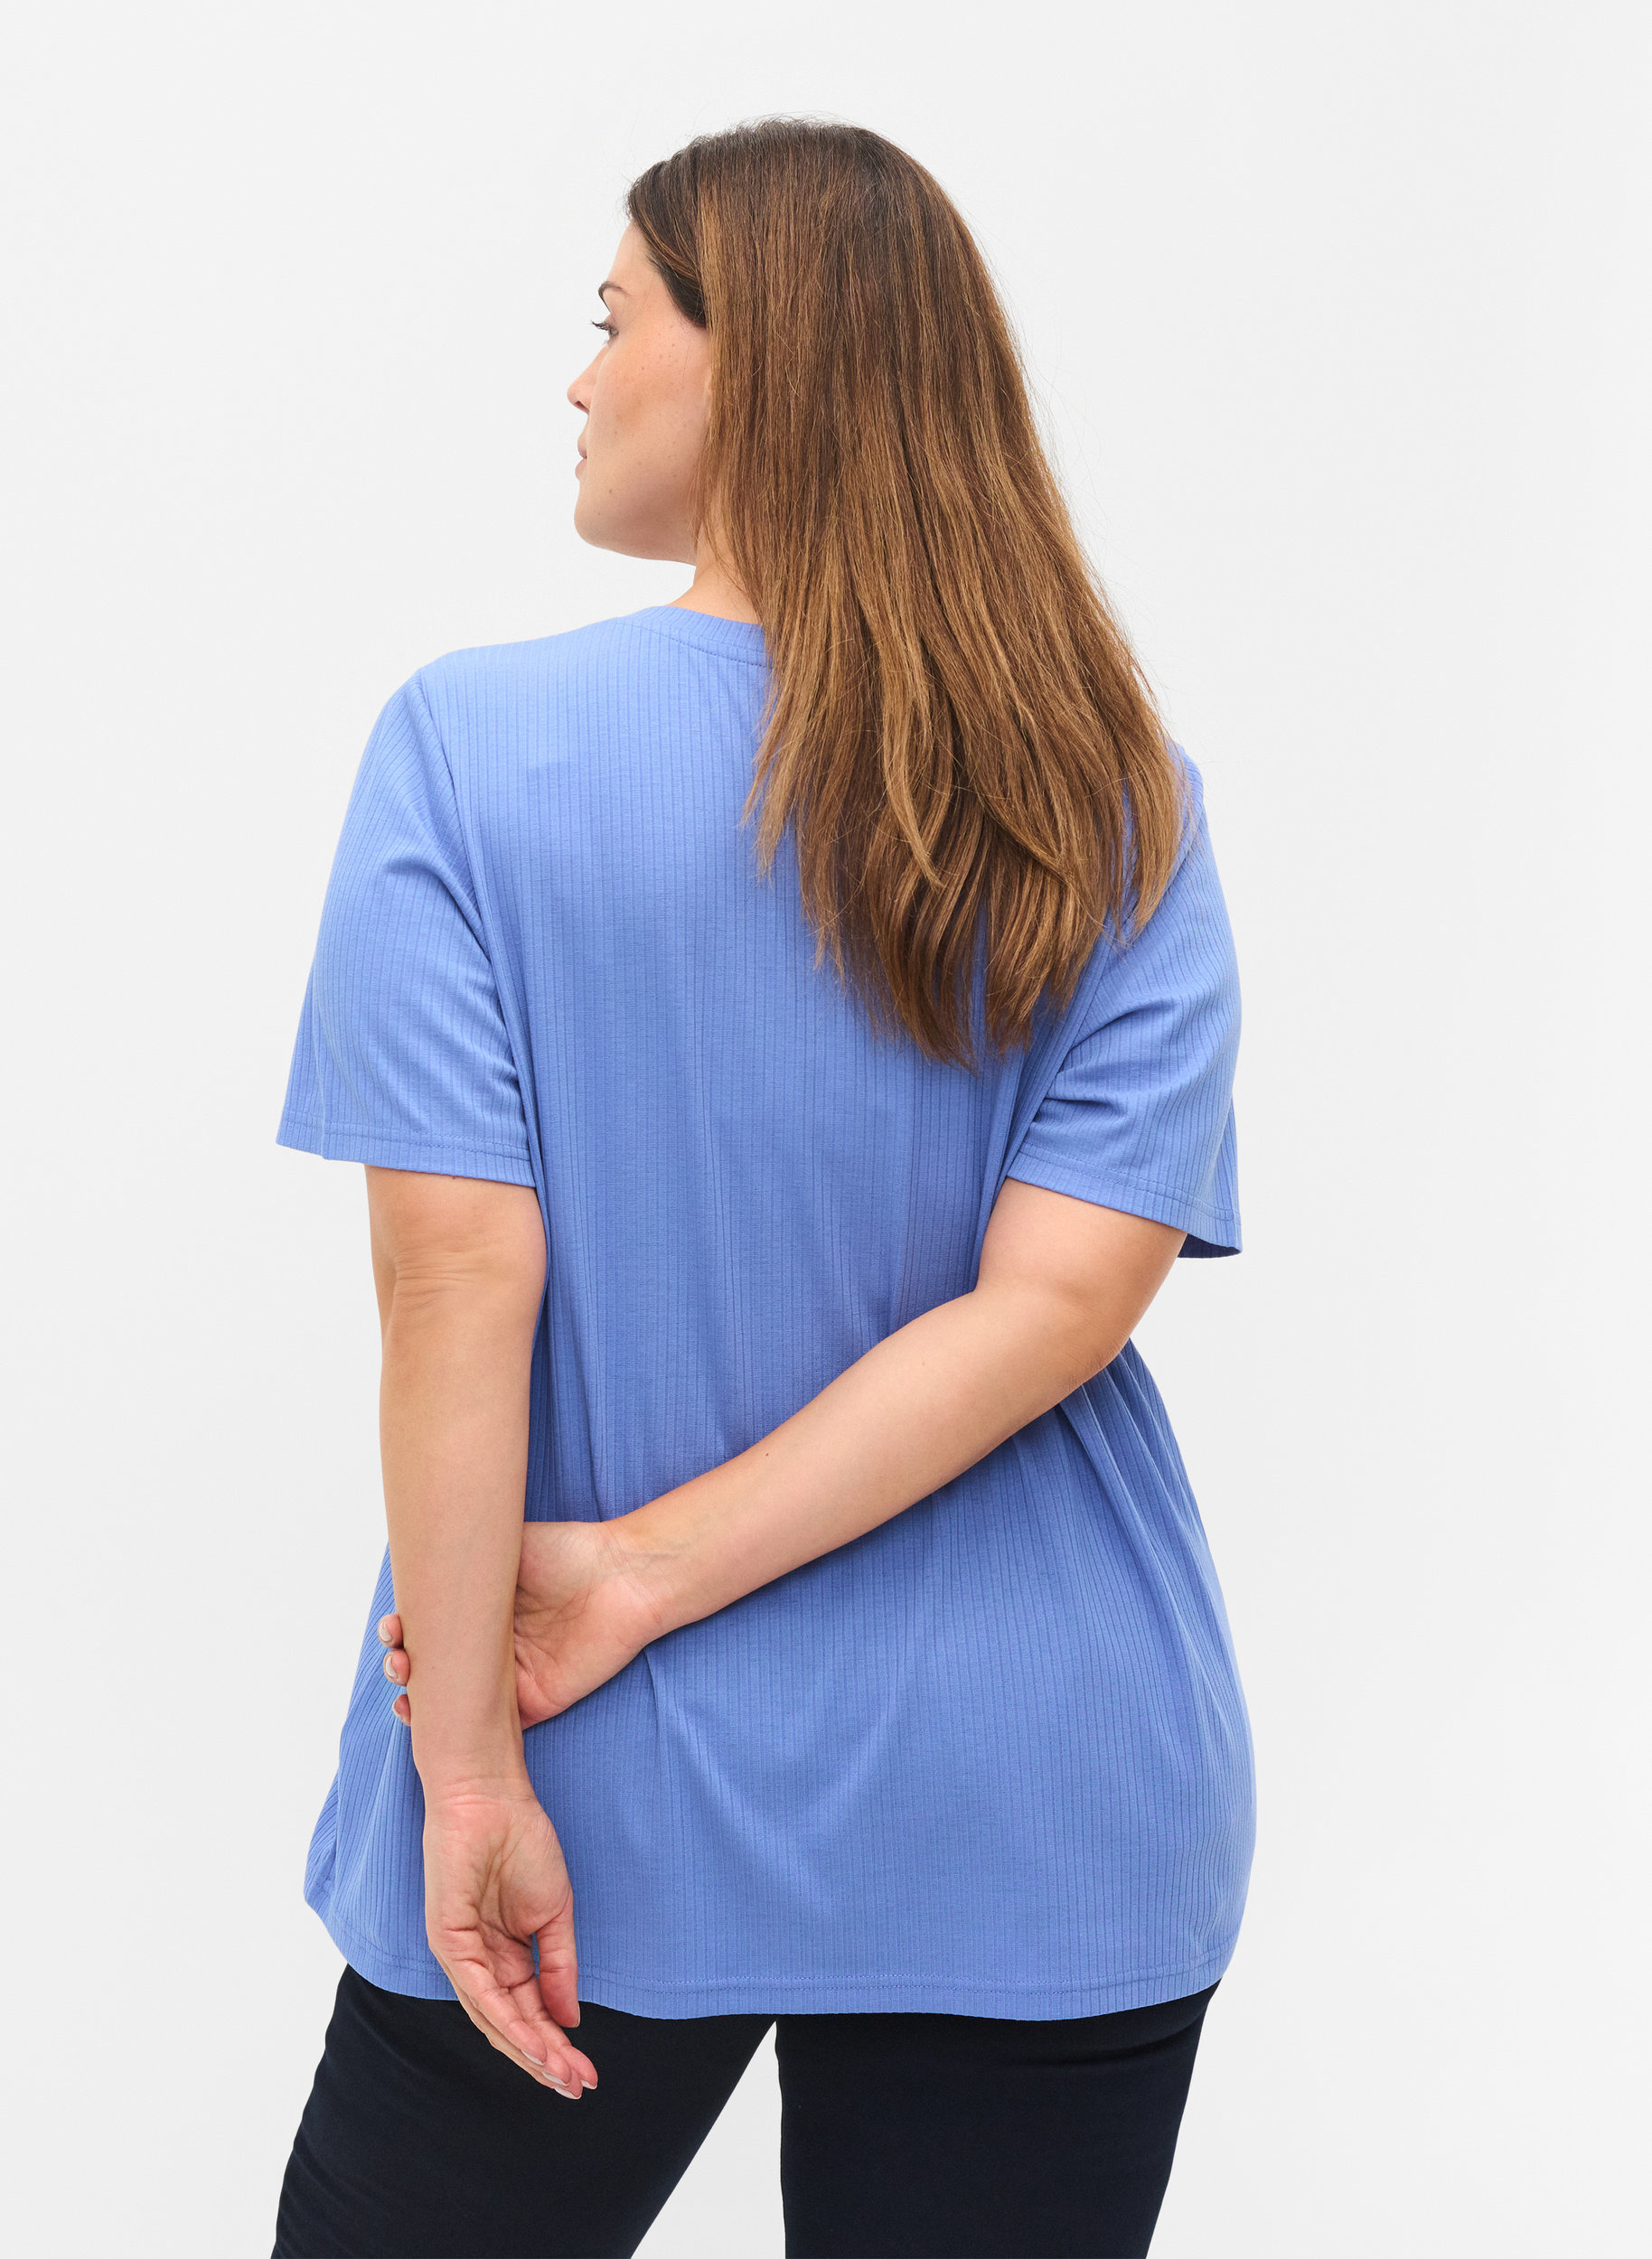 Short-sleeved t-shirt in ribbed fabric, Wedgewood, Model